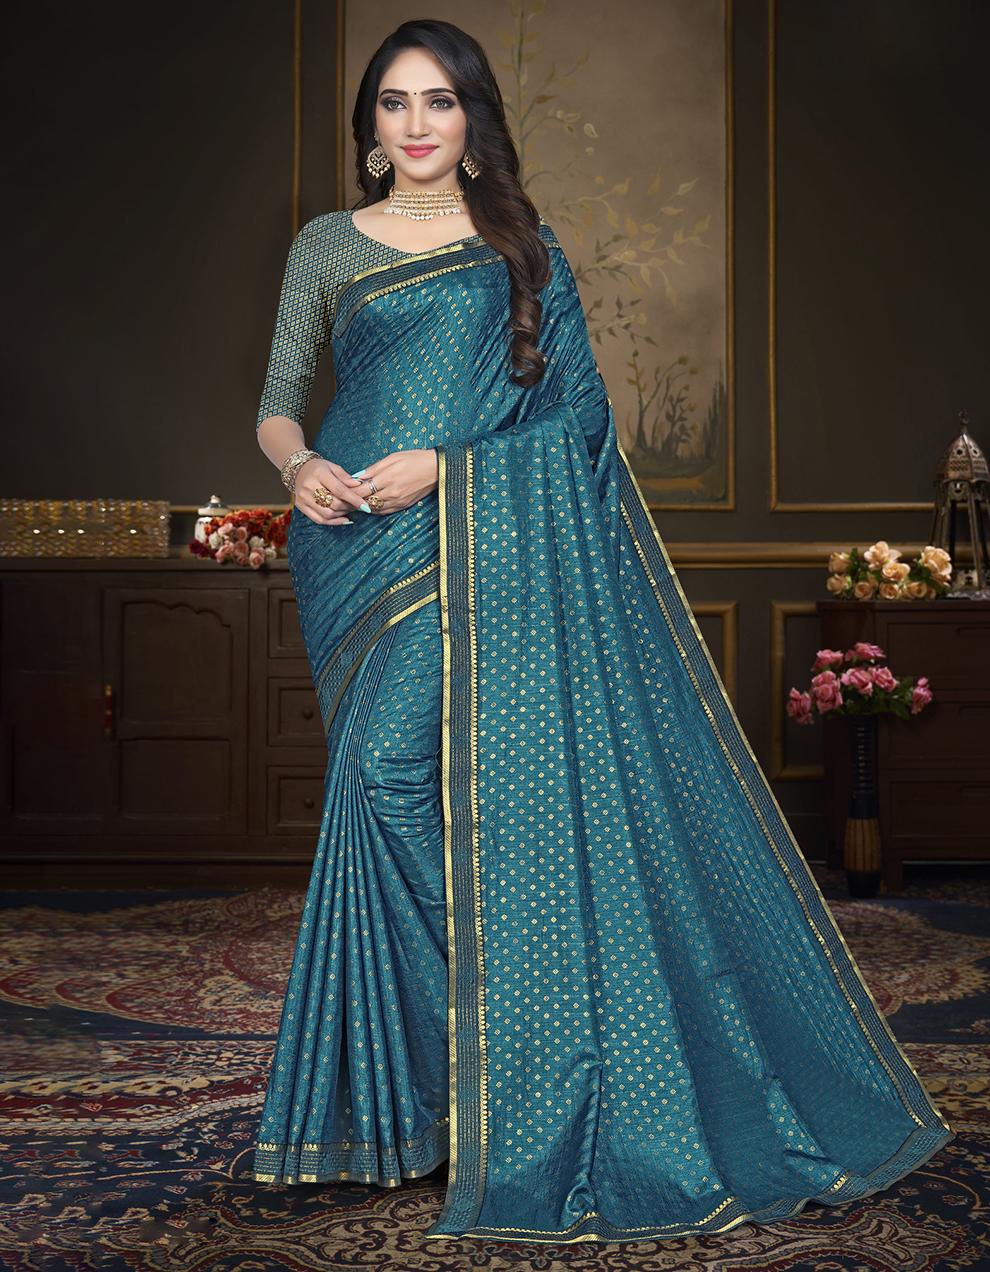 Teal Blue Vichitra Silk Saree With Blouse IW26964